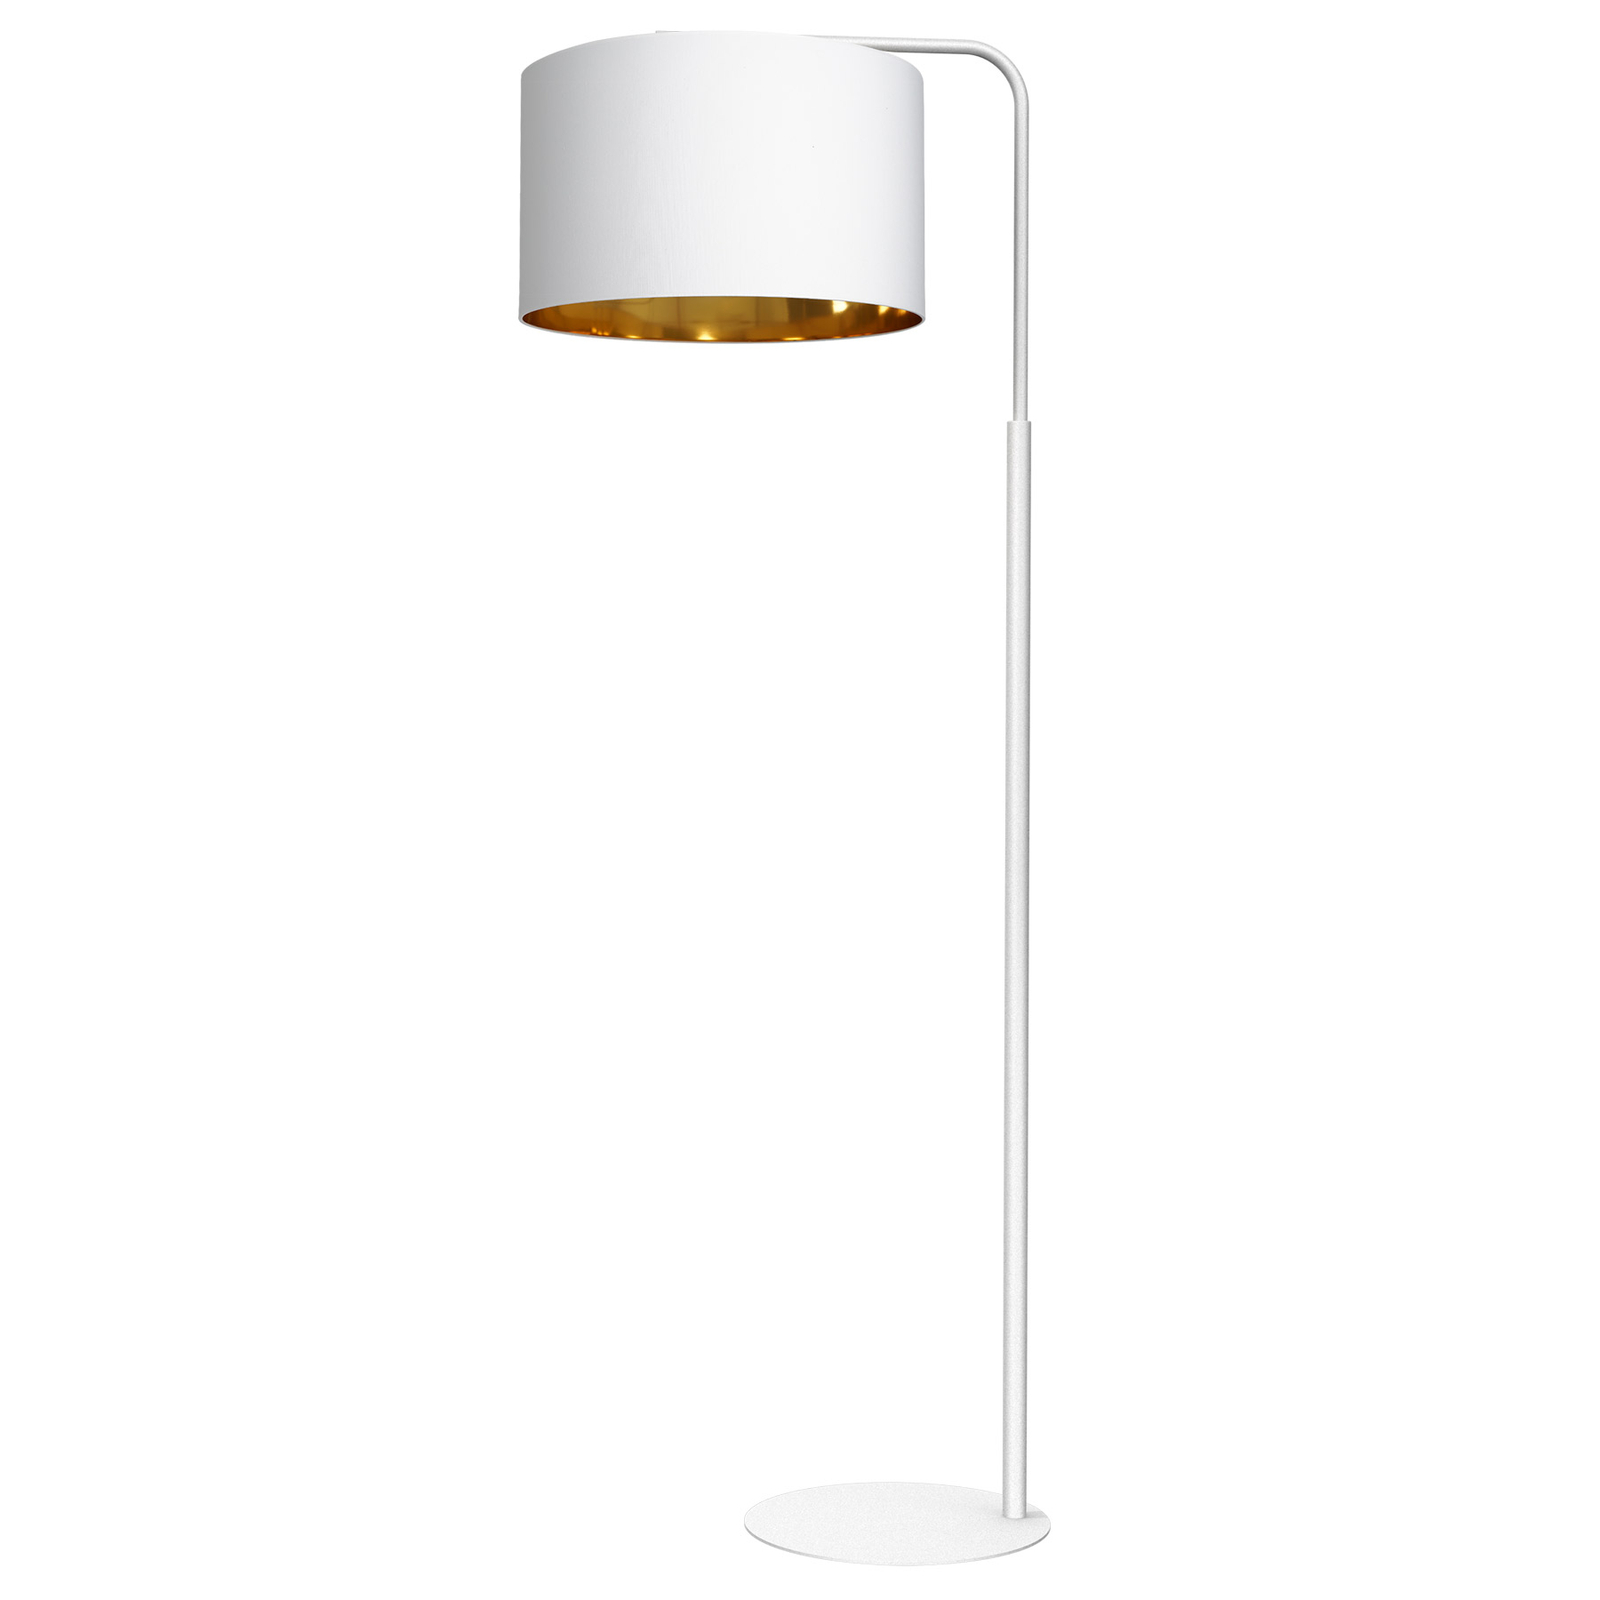 Soho floor lamp, cylindrical, curved, white/gold